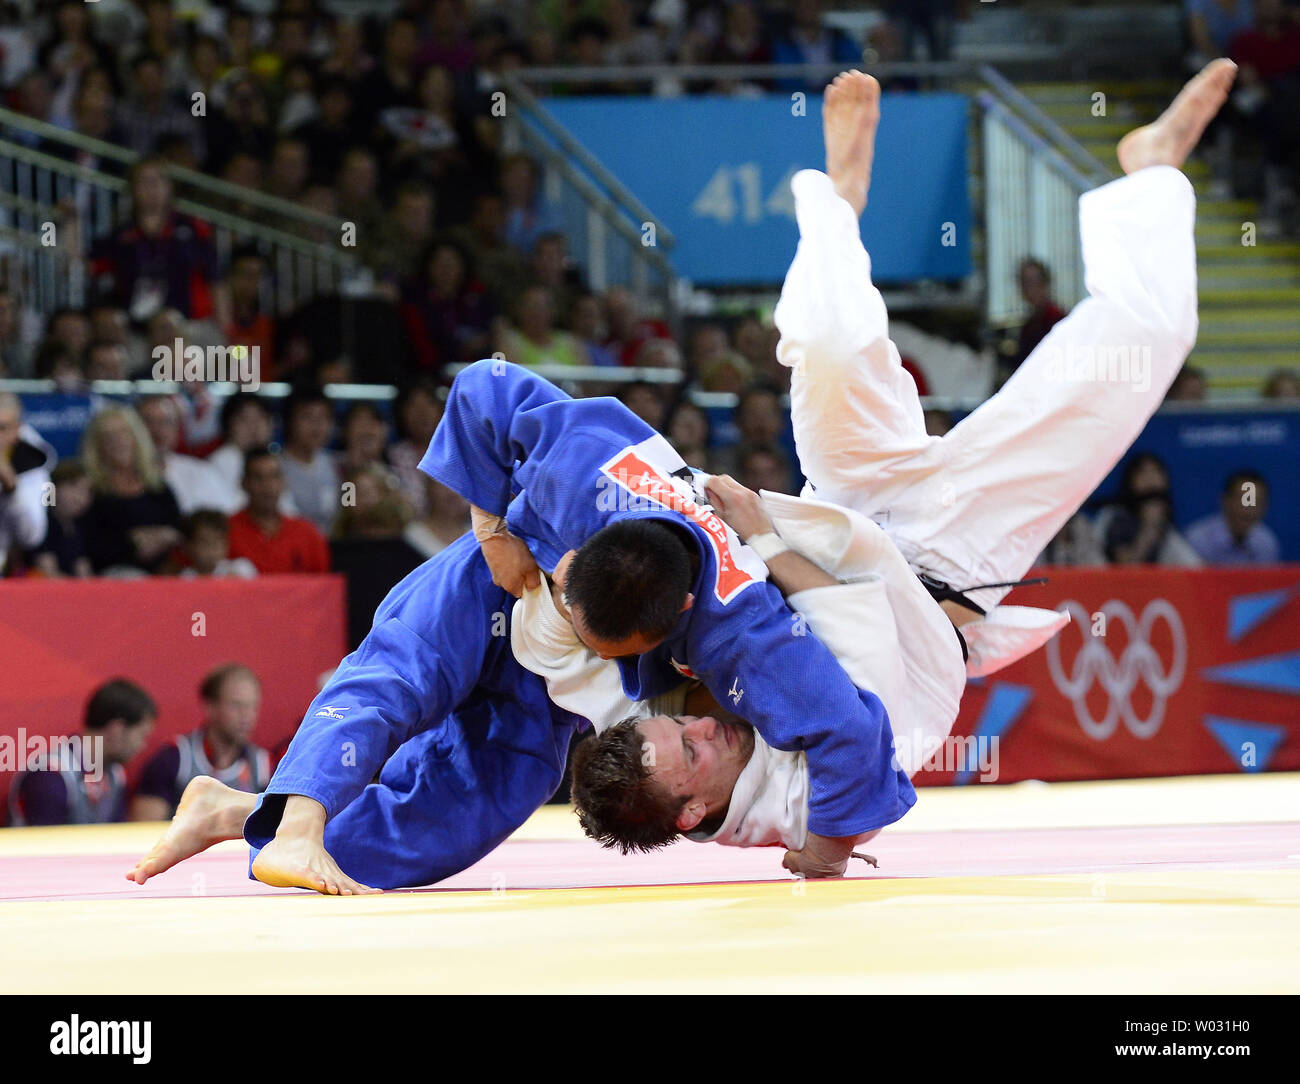 Men's Judo 66kg Bronze Medal contest between Masashi Ebinuma of Japan and Pawel Zagrodnik of Poland at the London 2012 Summer Olympic Games on July 29, 2012 in London. Masashi Ebinuma won the contest.  UPI/Ron Sachs Stock Photo